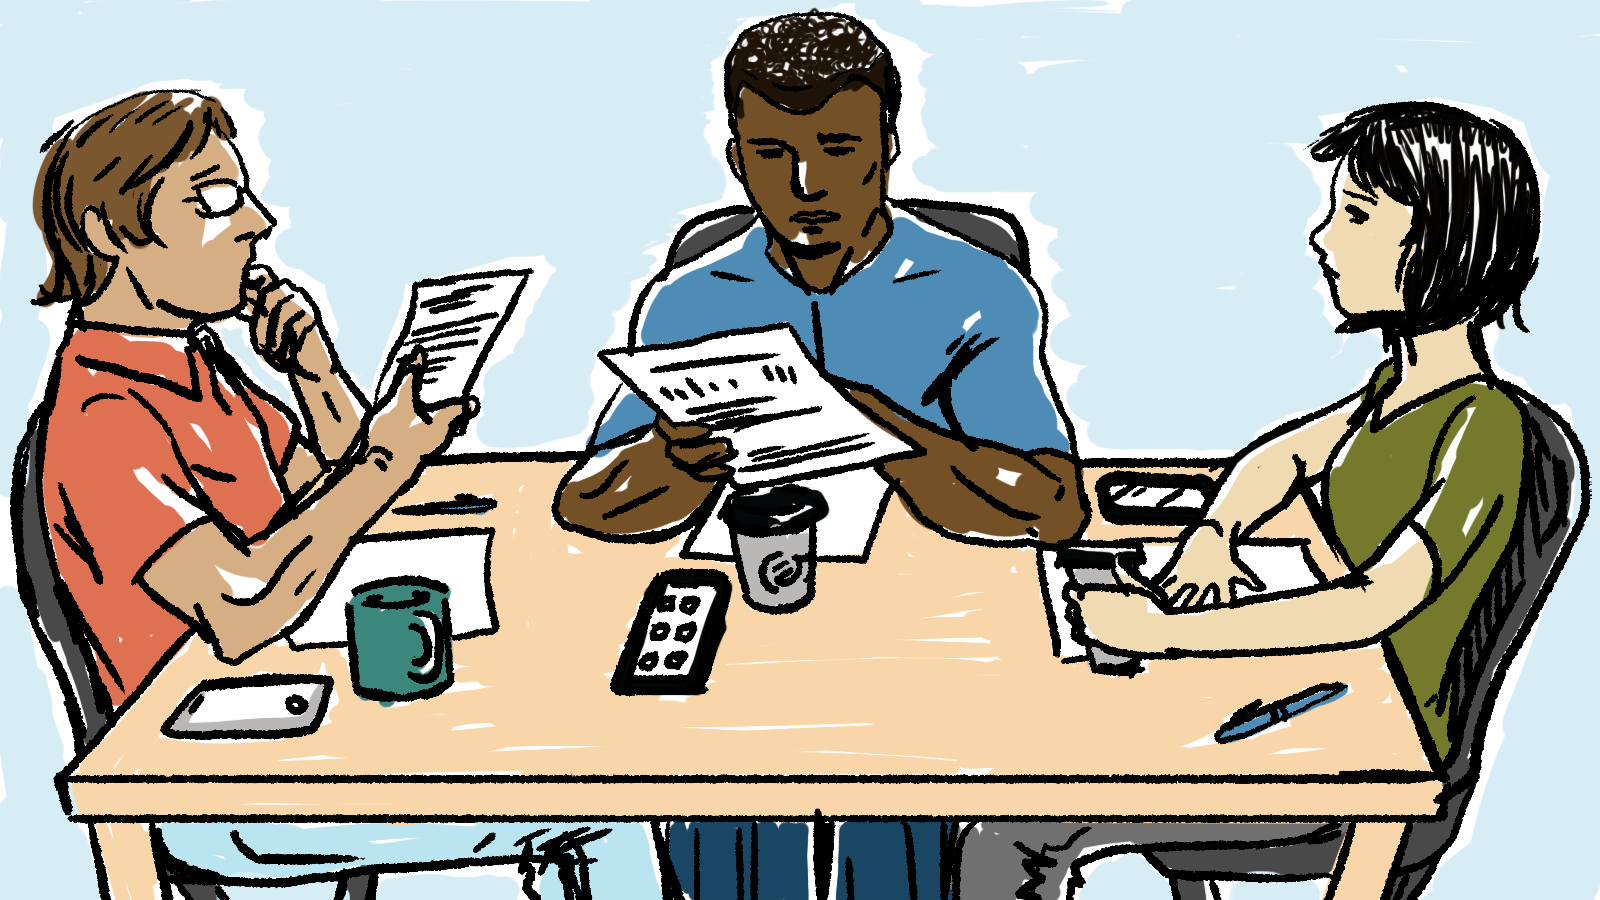 graphic of 3 people seated around a table, discussing topics before coming to an agreement